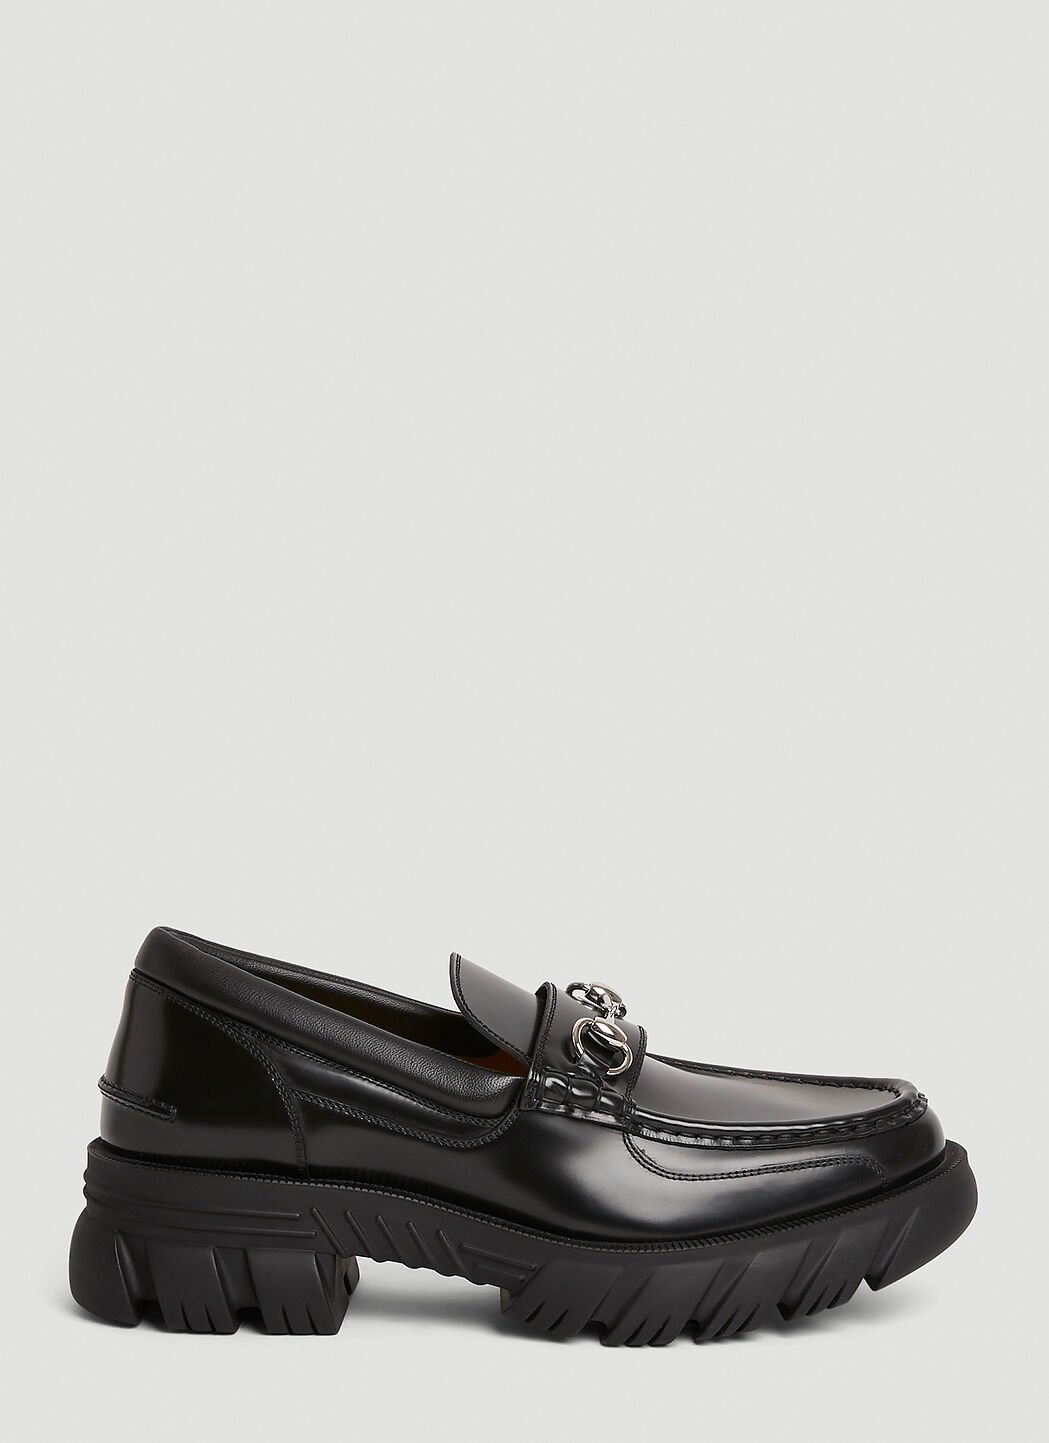 Thom Browne Leather Loafers  Black thb0155012